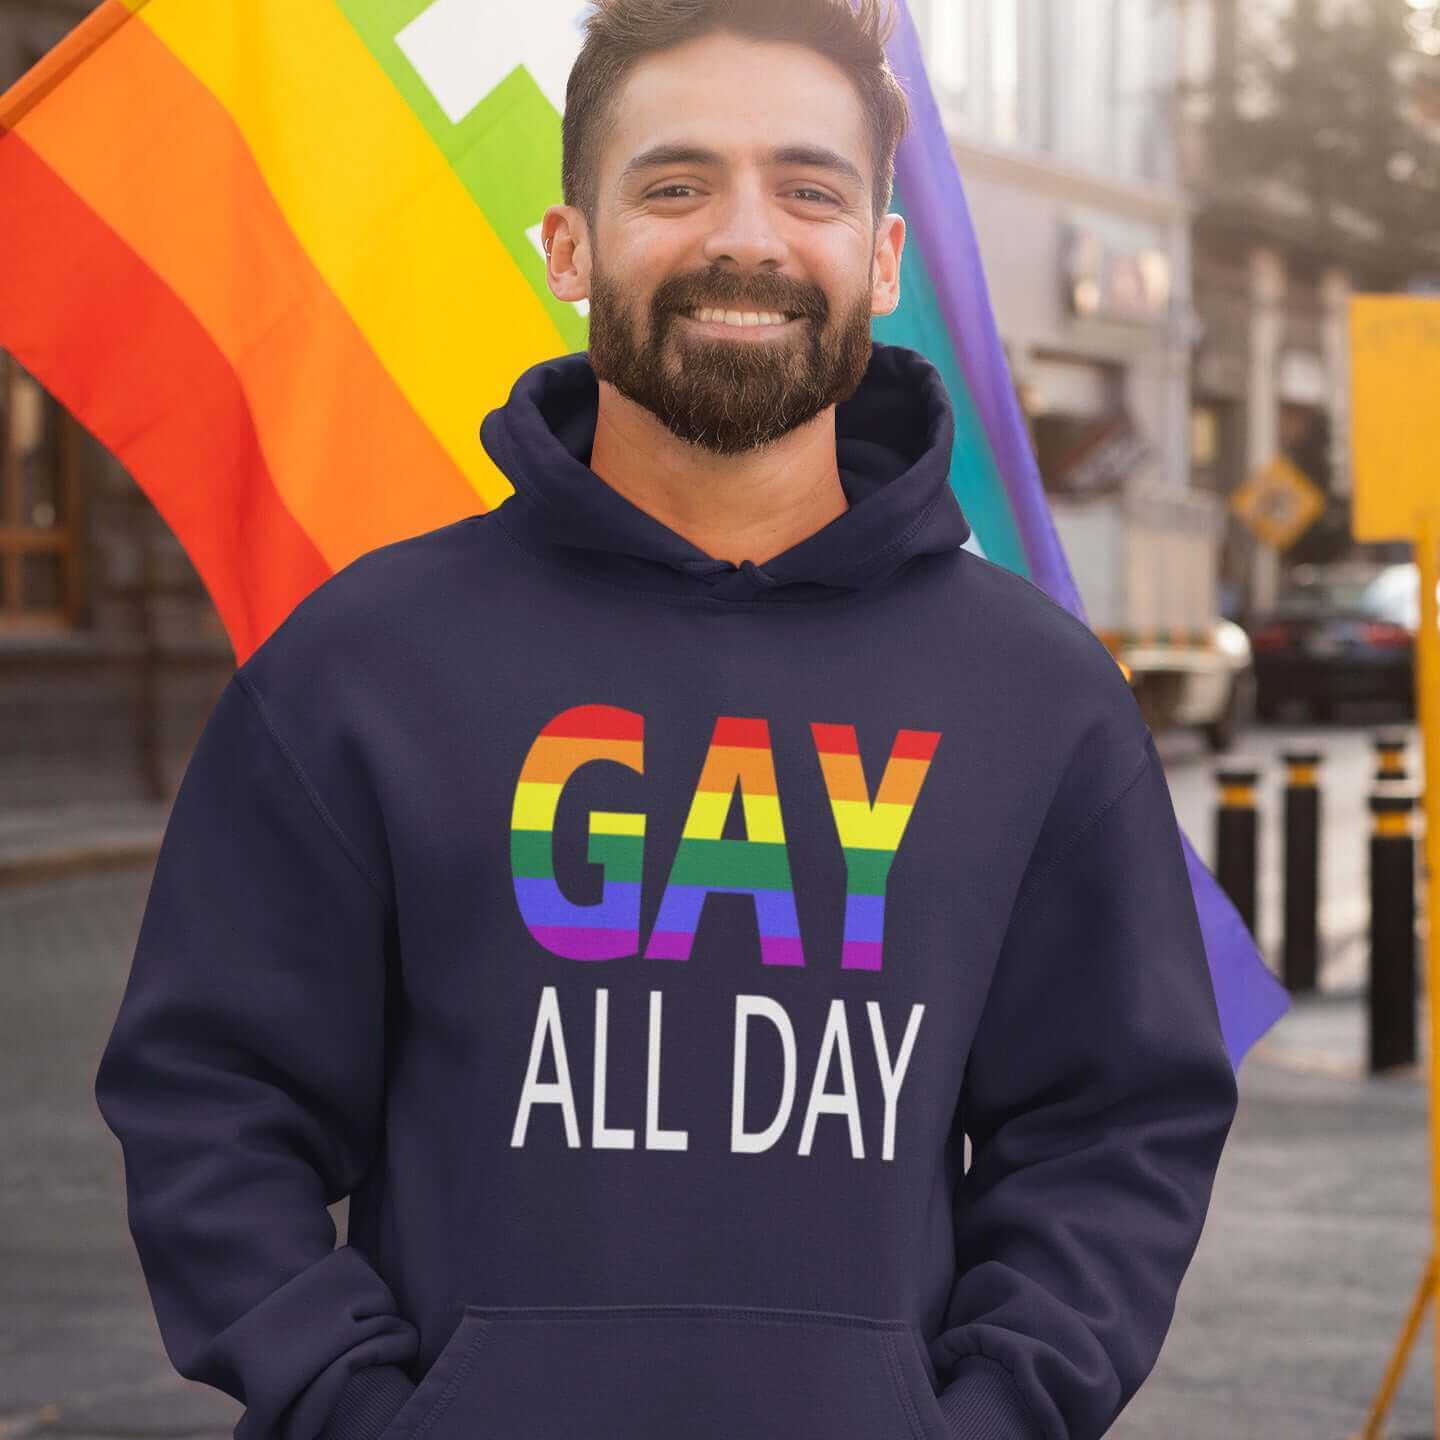 Man at a pride event wearing a navy blue hoodie sweatshirt with the words Gay all day printed on the front. The word Gay is in rainbow stripe font. 